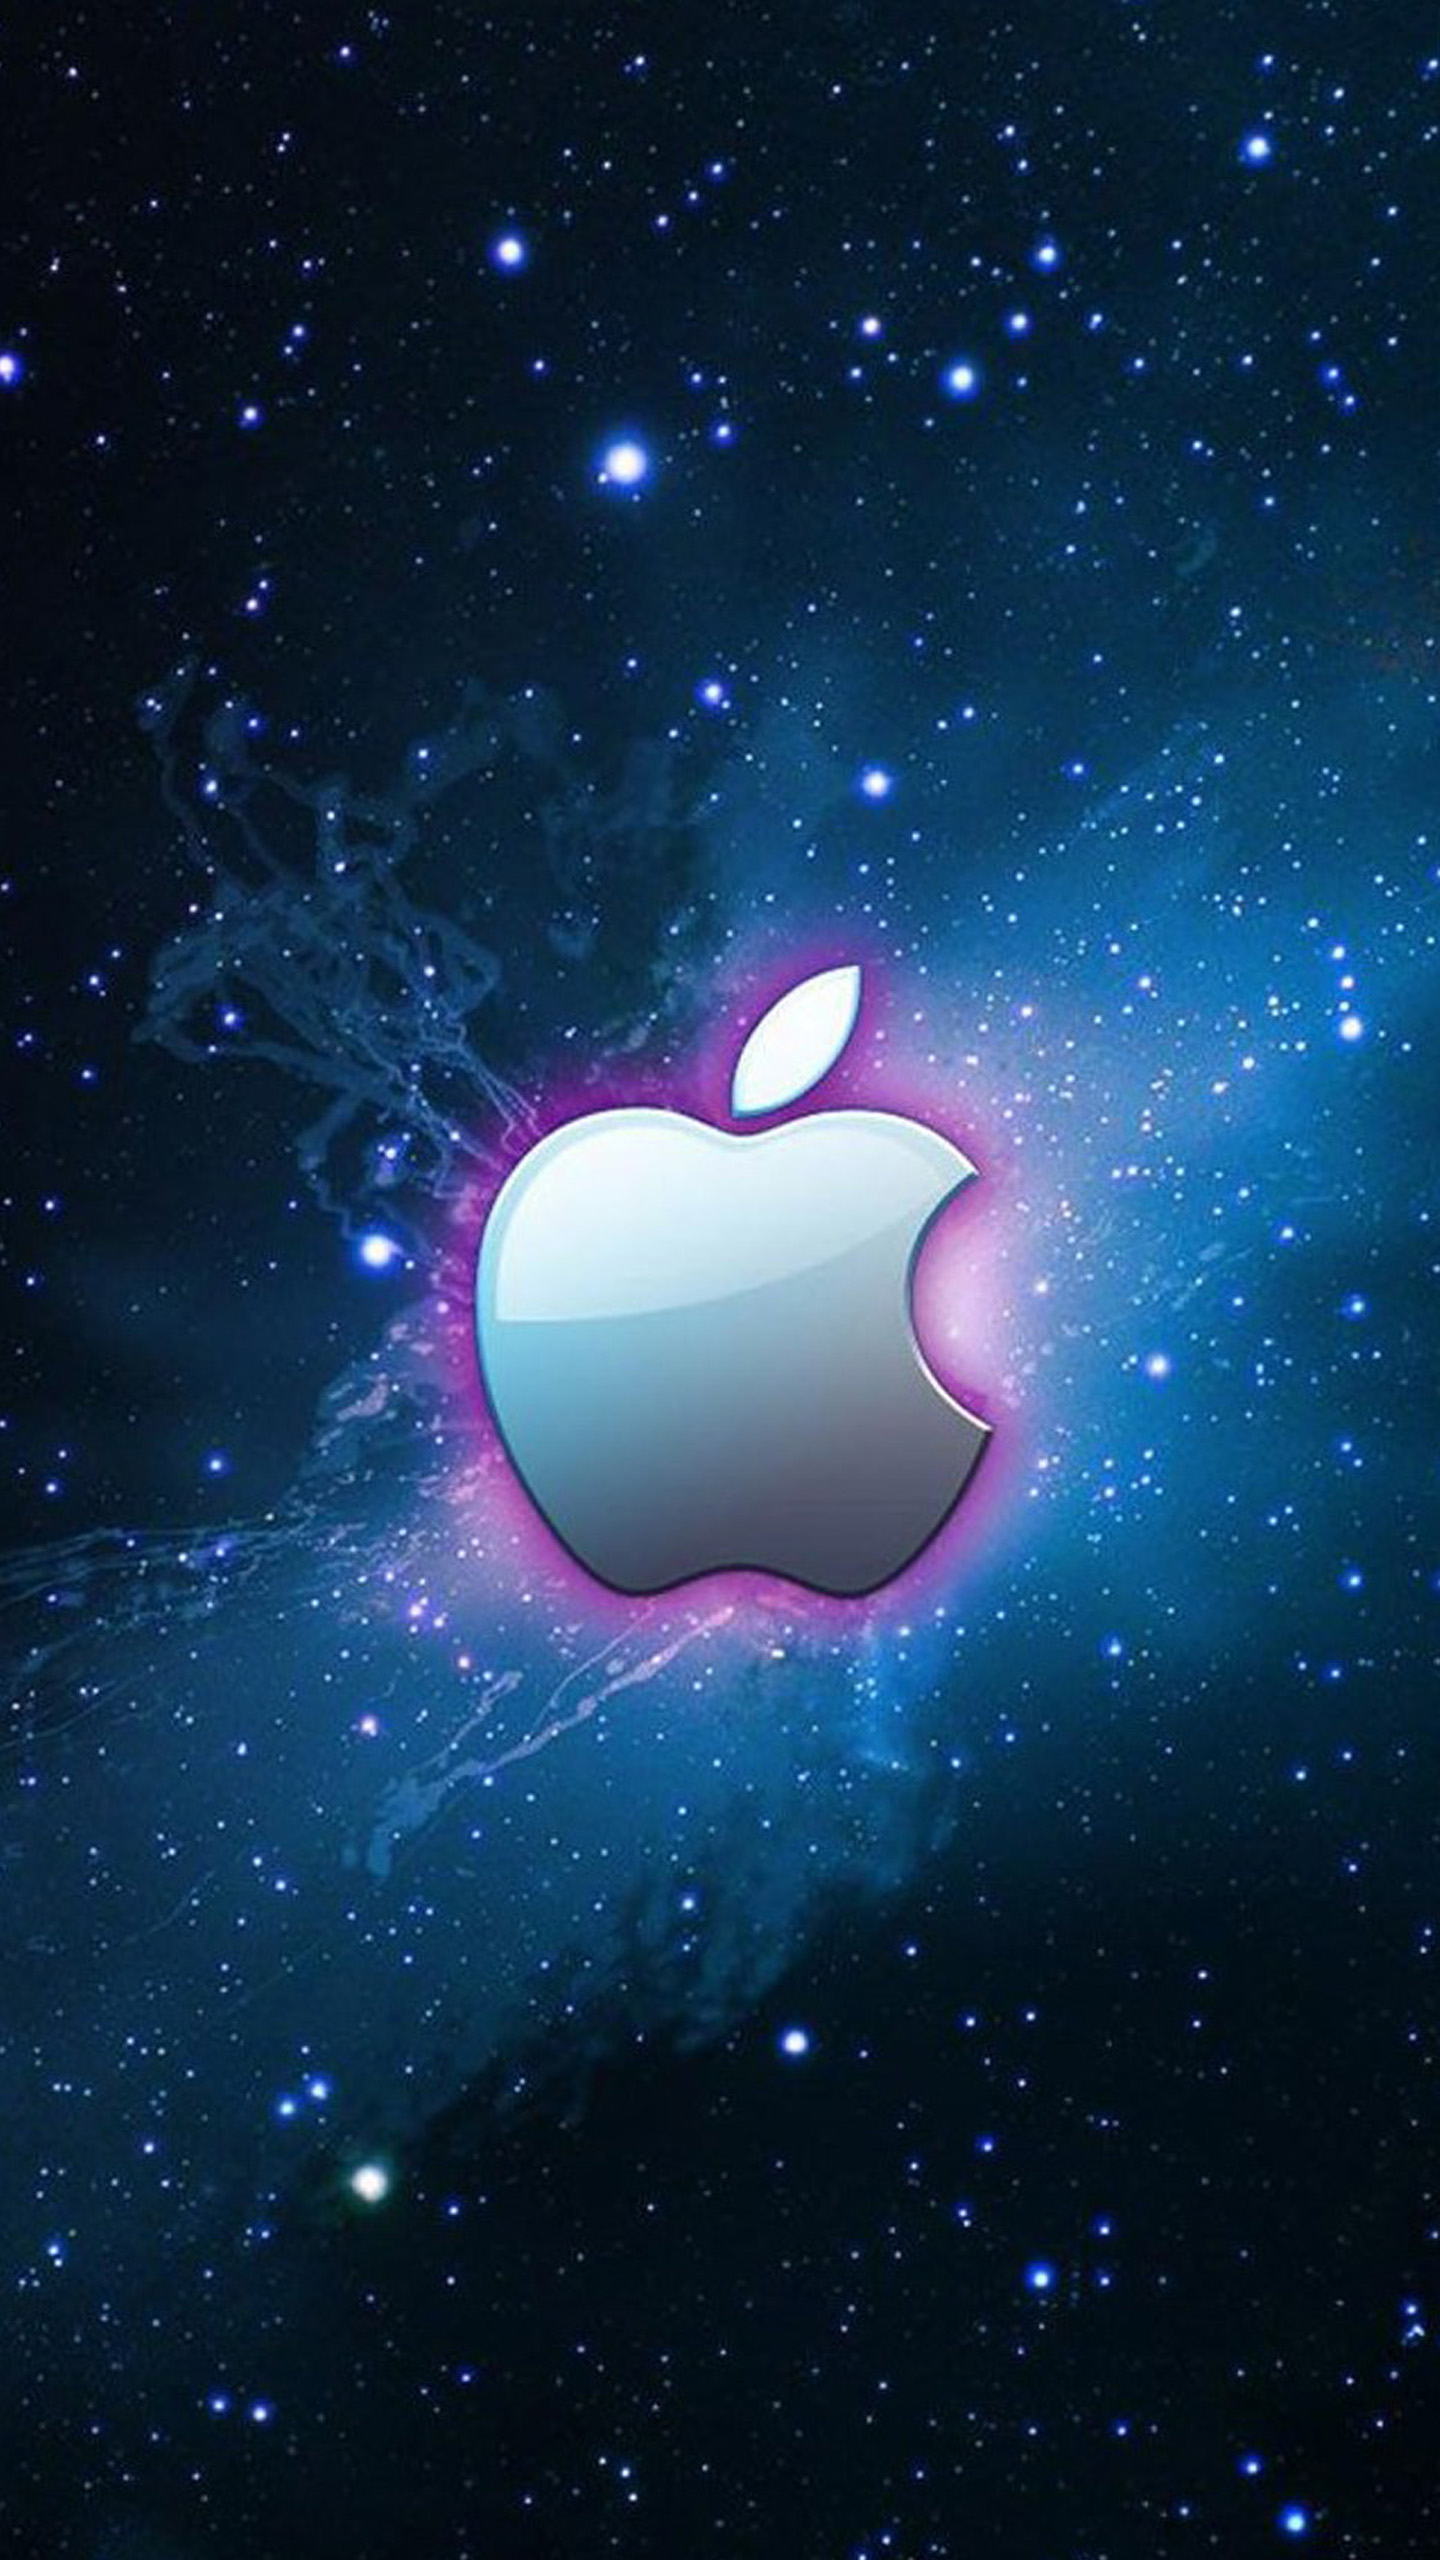 Awesome Apple logo 1 Galaxy S6 Wallpaper Galaxy S6 Backgrounds